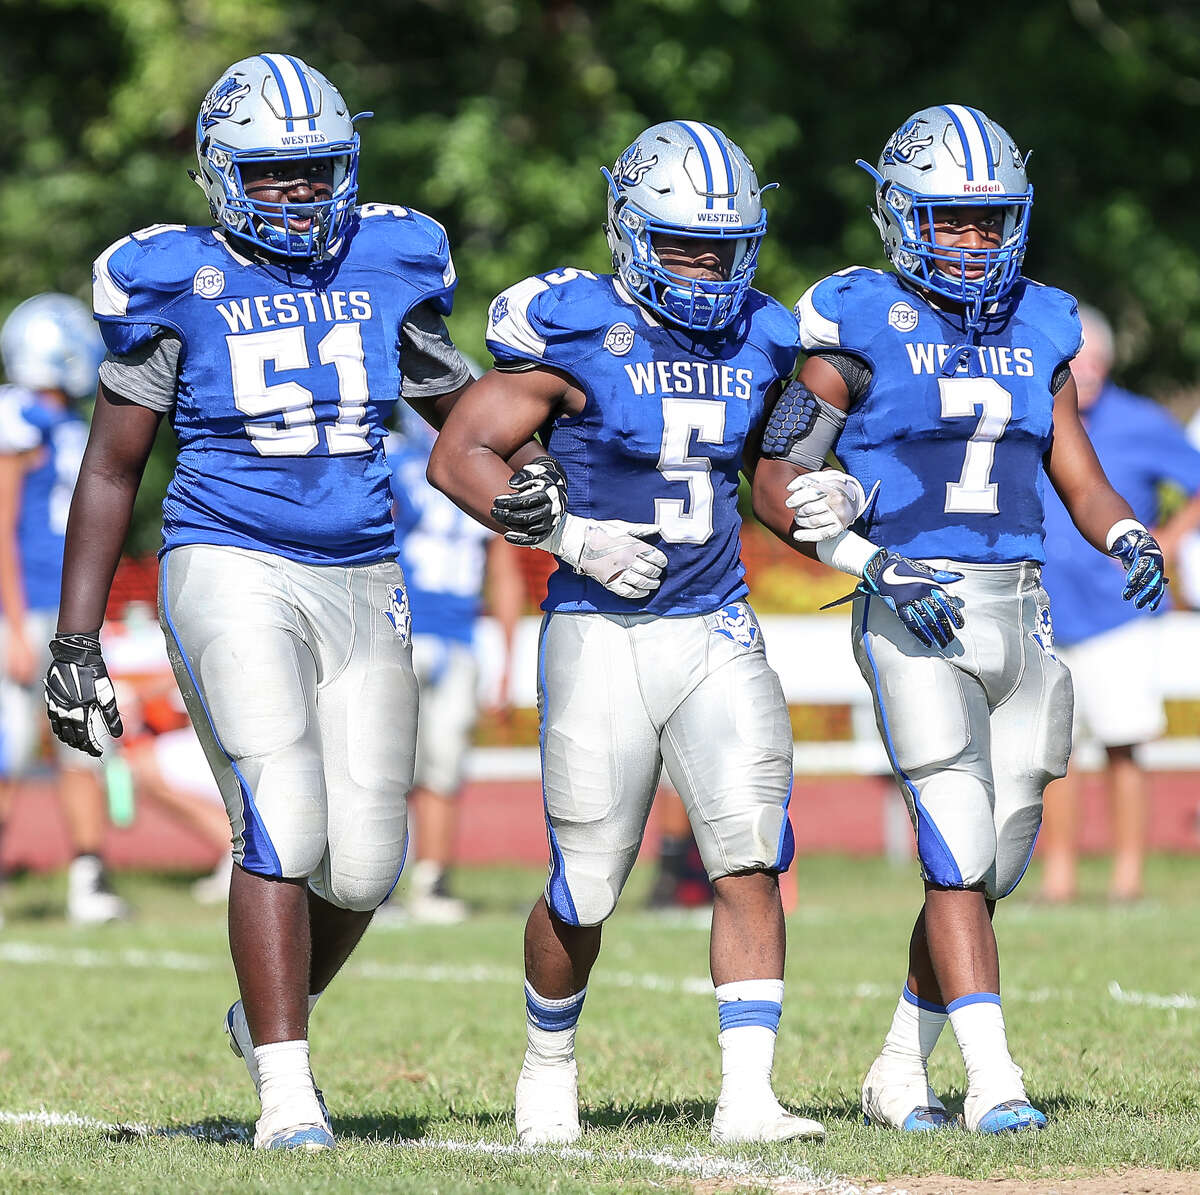 (John Vanacore/For Hearst Connecticut Media) The Wilbur Cross Govenors hosted the Blue Devils of West Haven Friday September 15, 2017 on week two of the football season. West Haven defeated Wilbur Cross 47-20 to go 2-0 on the 2017 season.